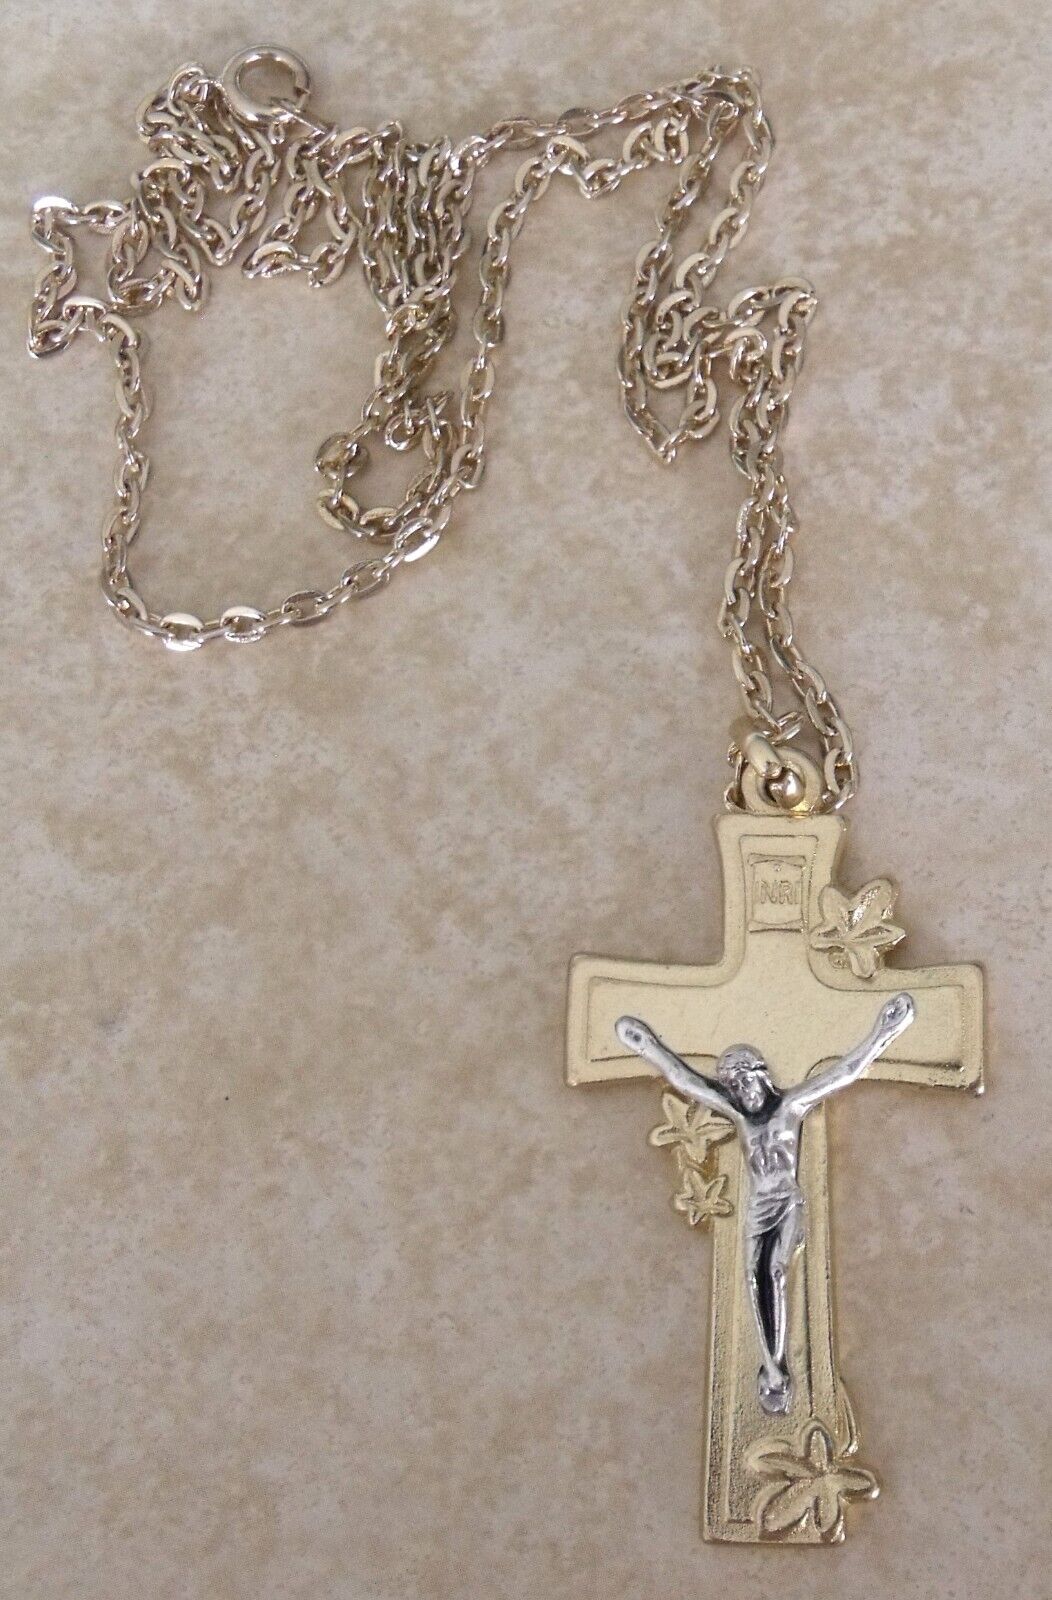 New Unique GP Flower ITALY Crucifix 25 inch chain Catholic Religious Necklace